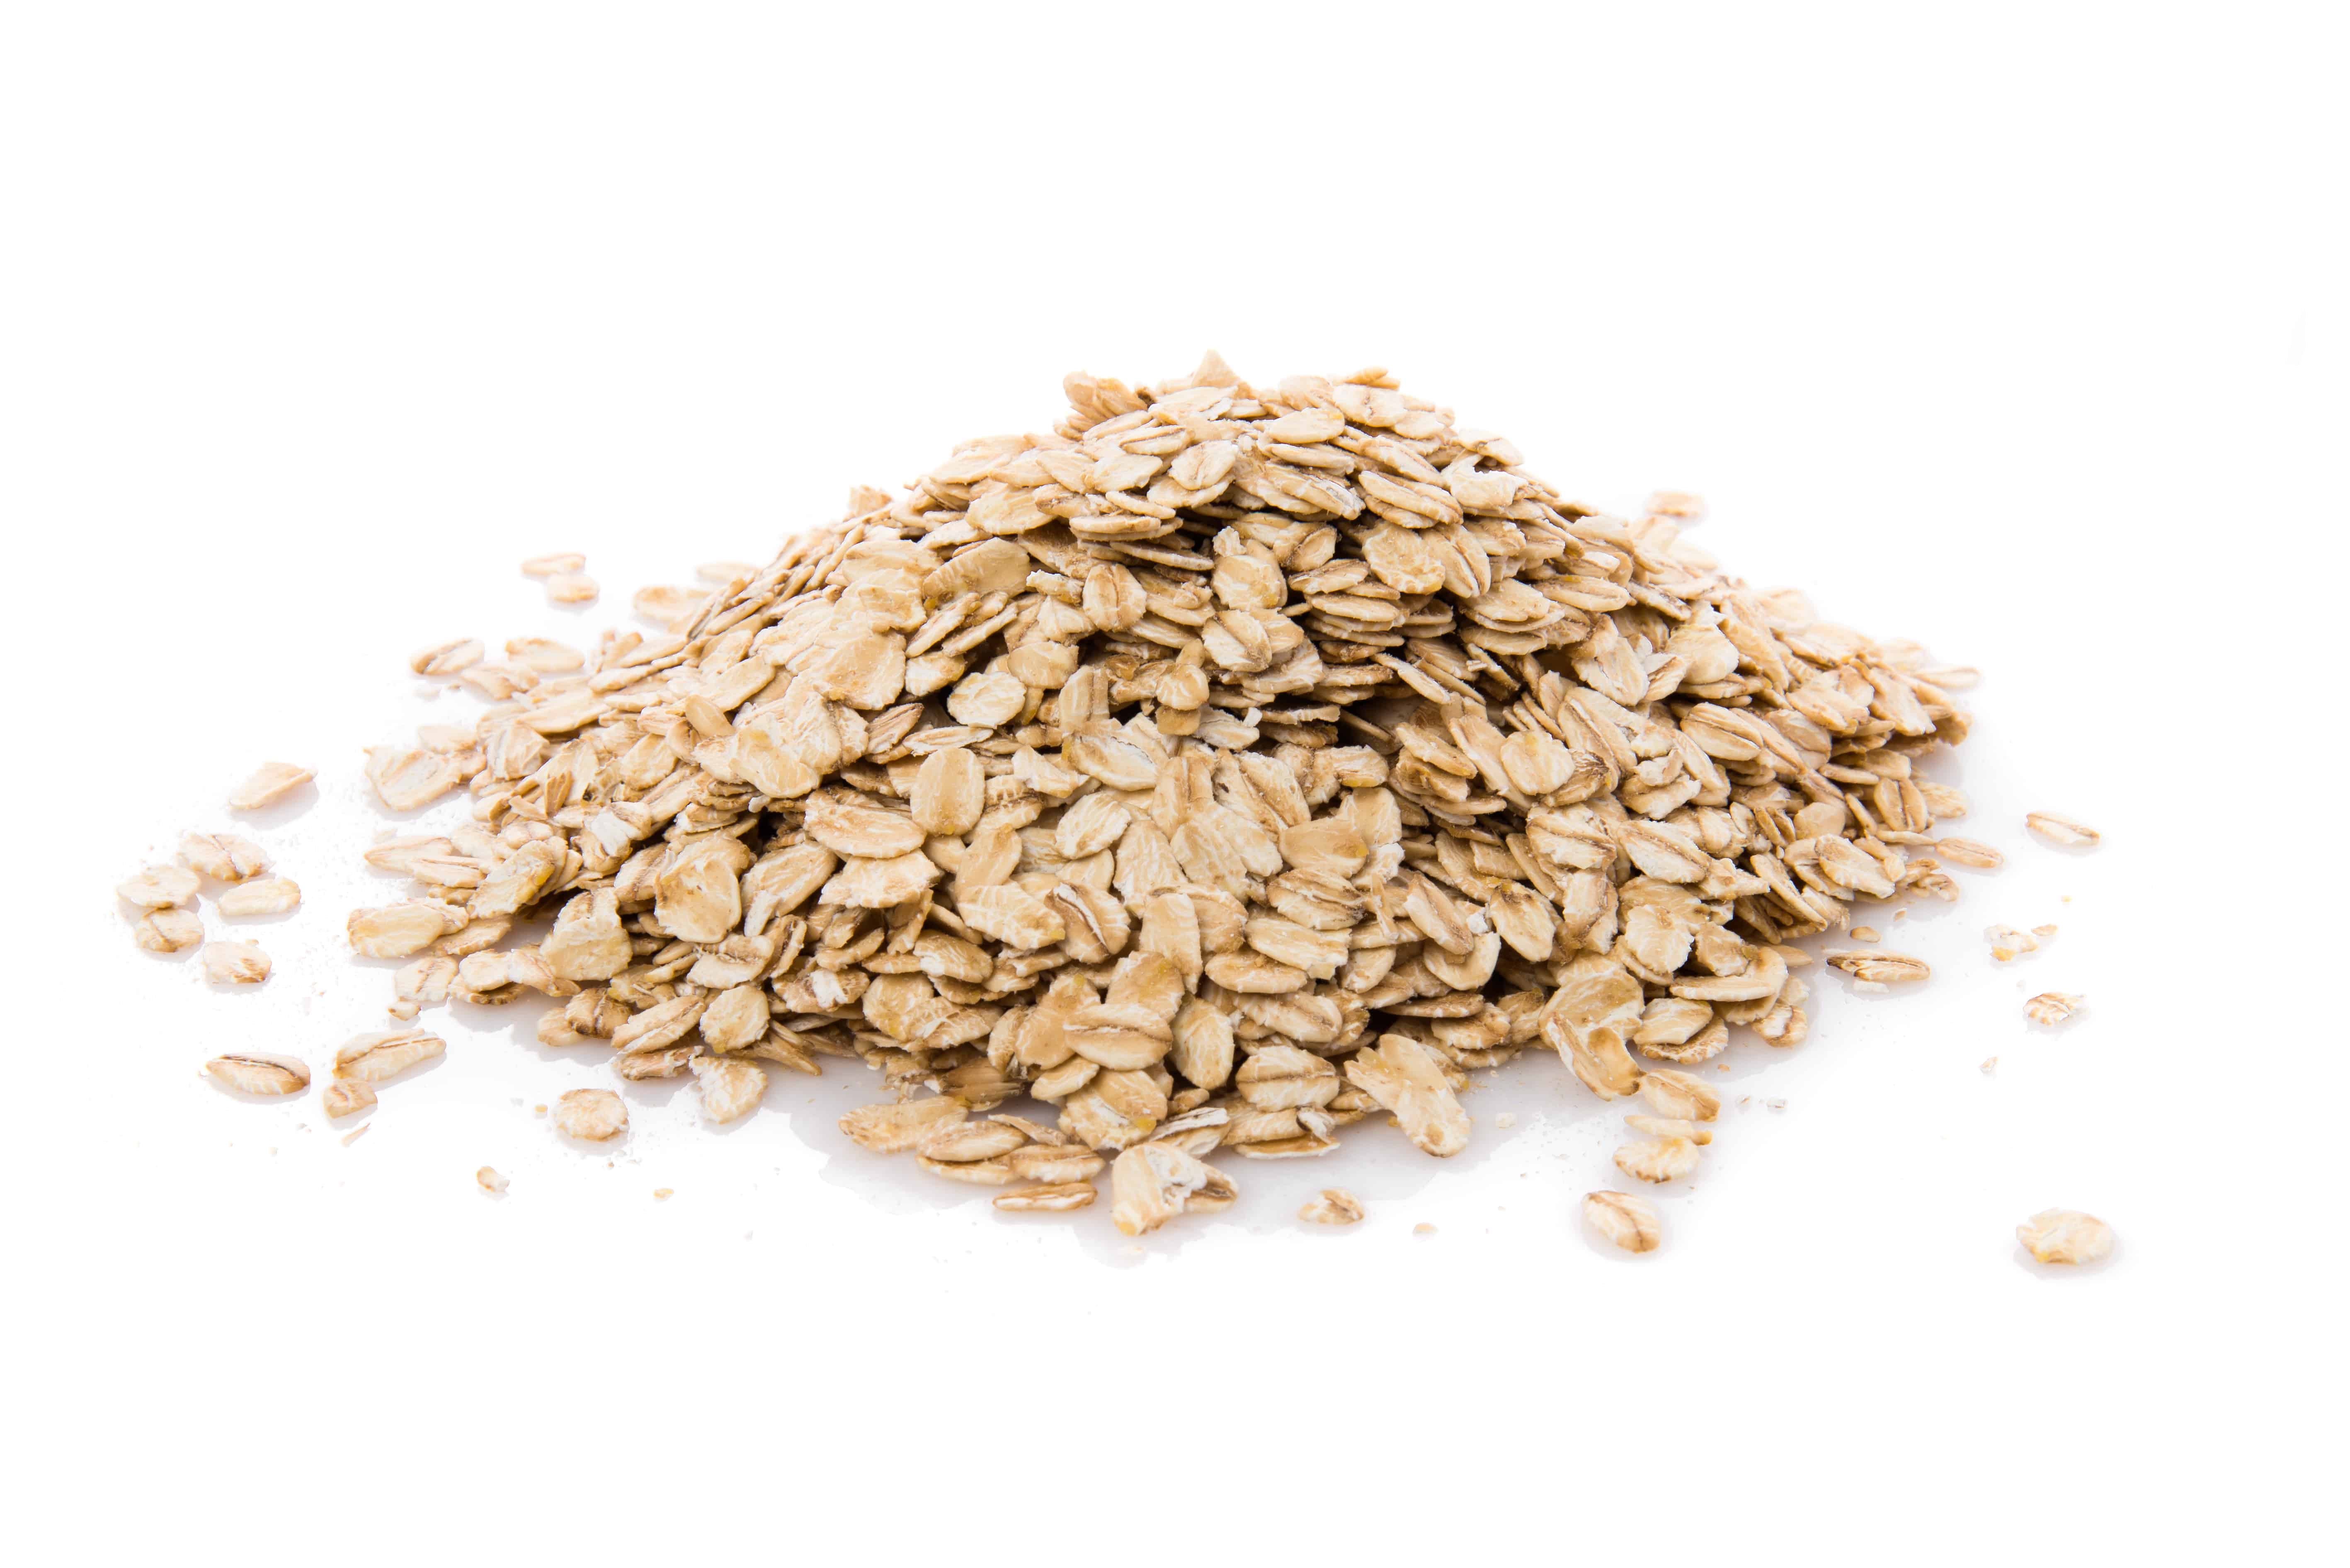 OATS Eat a balanced and nutritious diet that includes healthy proteins and fats.